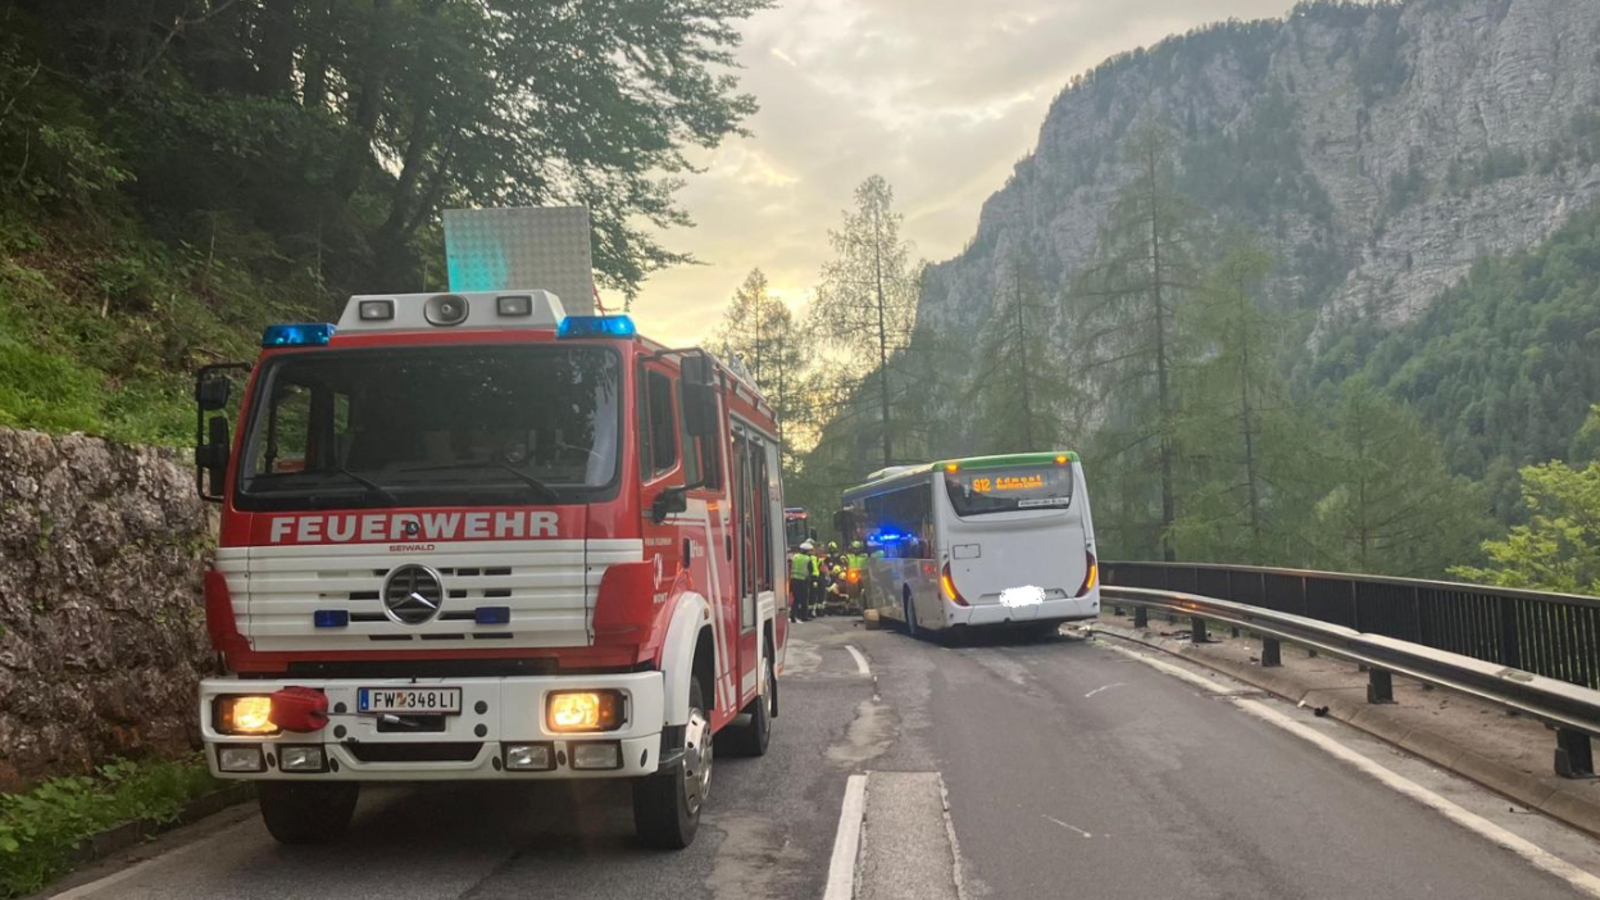 Motorcyclist from Lower Austria Killed in Tragic Accident in Styria